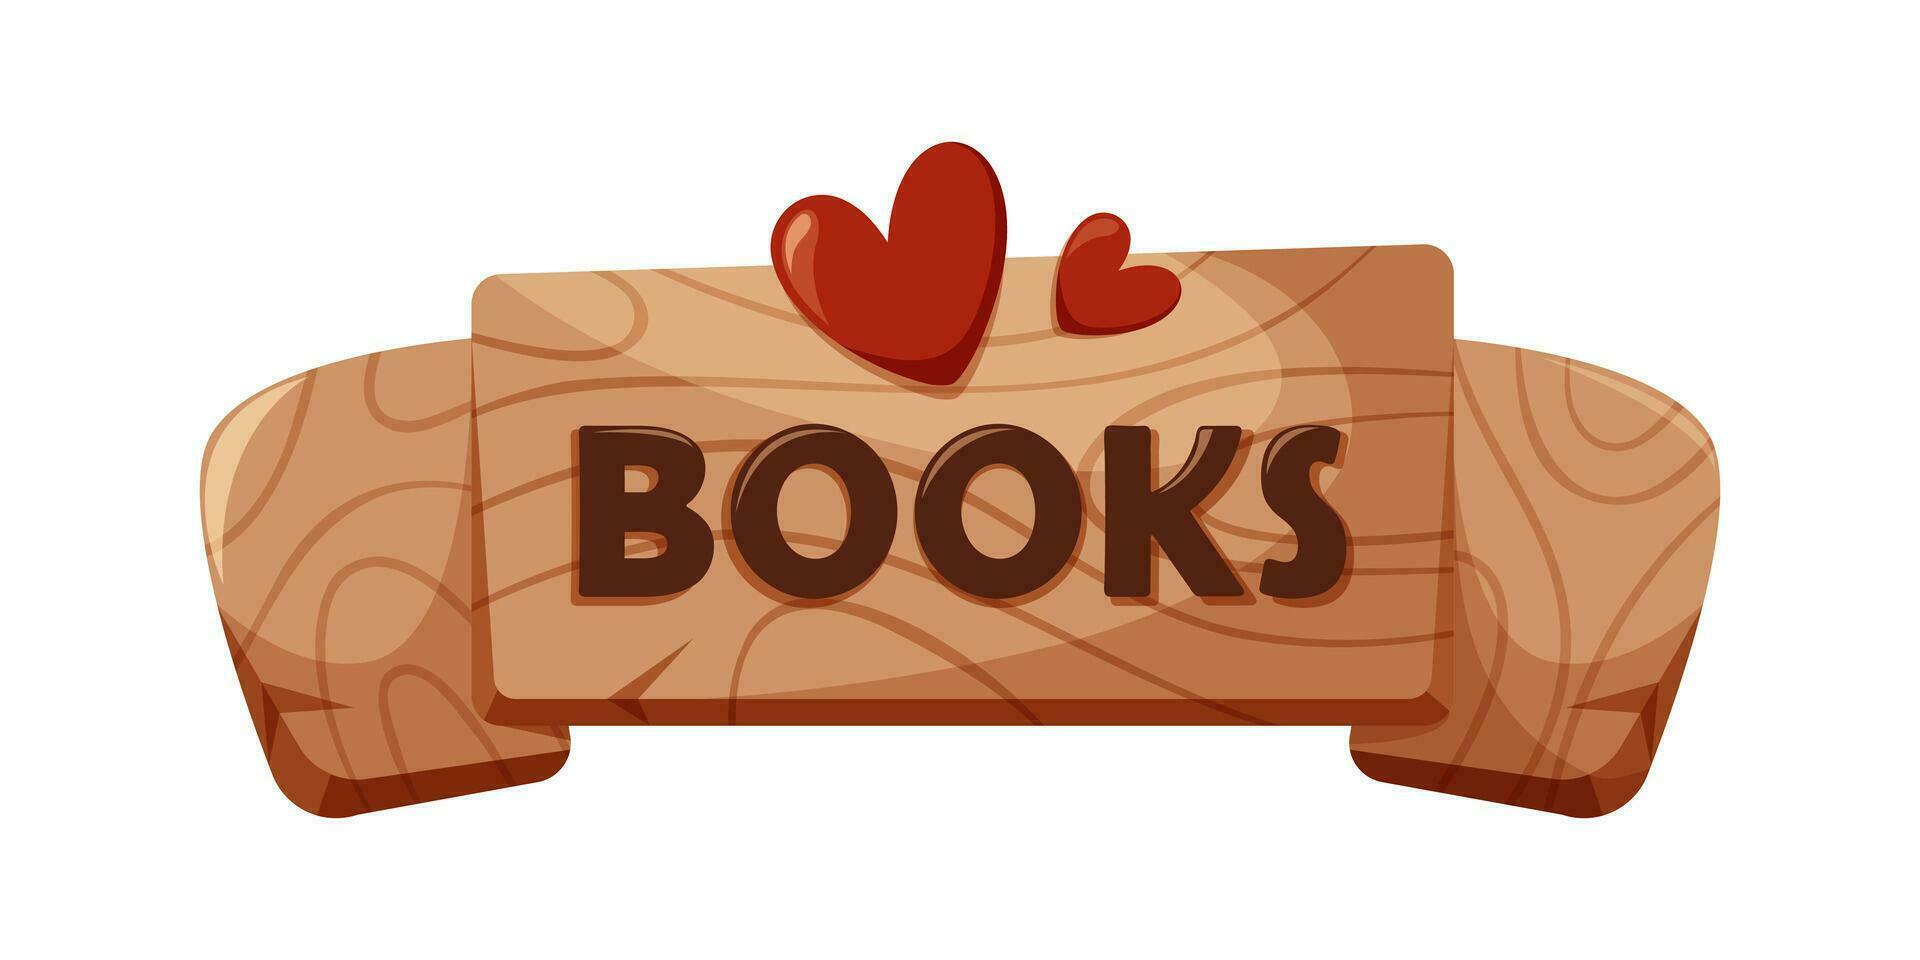 Wooden board with book inscription and hearts. Concept of education, book lovers and libraries, bookstores. Read more. Cartoon vector illustration